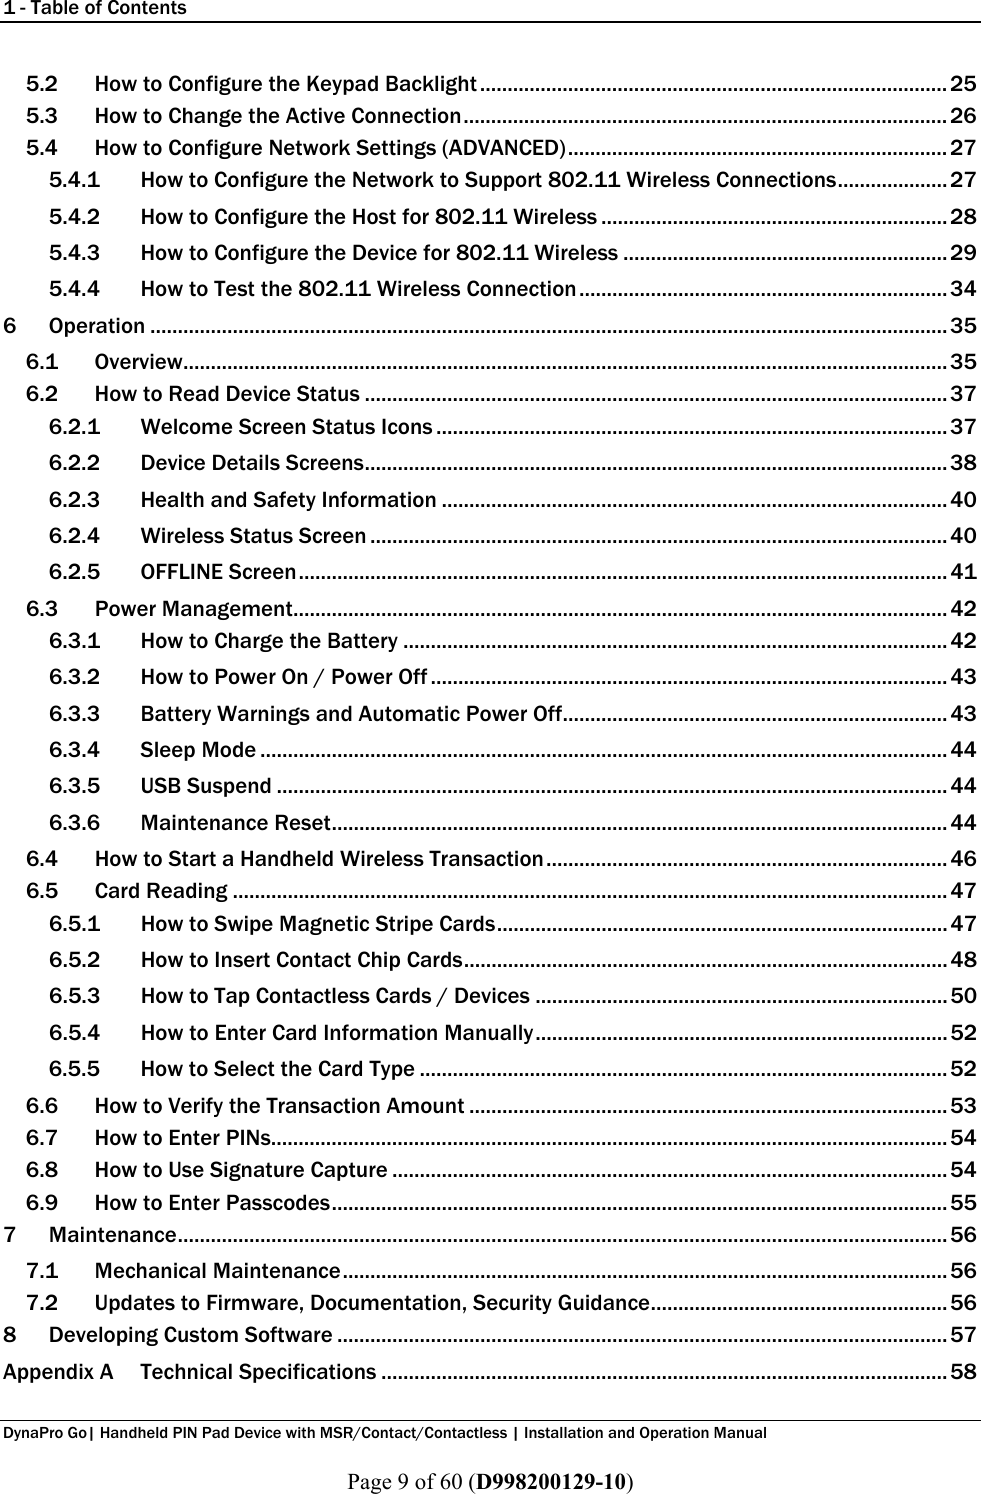 1 - Table of Contents  DynaPro Go| Handheld PIN Pad Device with MSR/Contact/Contactless | Installation and Operation Manual  Page 9 of 60 (D998200129-10) 5.2 How to Configure the Keypad Backlight ..................................................................................... 25 5.3 How to Change the Active Connection ........................................................................................ 26 5.4 How to Configure Network Settings (ADVANCED) ..................................................................... 27 5.4.1 How to Configure the Network to Support 802.11 Wireless Connections .................... 27 5.4.2 How to Configure the Host for 802.11 Wireless ............................................................... 28 5.4.3 How to Configure the Device for 802.11 Wireless ........................................................... 29 5.4.4 How to Test the 802.11 Wireless Connection ................................................................... 34 6 Operation ................................................................................................................................................. 35 6.1 Overview........................................................................................................................................... 35 6.2 How to Read Device Status .......................................................................................................... 37 6.2.1 Welcome Screen Status Icons ............................................................................................. 37 6.2.2 Device Details Screens .......................................................................................................... 38 6.2.3 Health and Safety Information ............................................................................................ 40 6.2.4 Wireless Status Screen ......................................................................................................... 40 6.2.5 OFFLINE Screen ...................................................................................................................... 41 6.3 Power Management....................................................................................................................... 42 6.3.1 How to Charge the Battery ................................................................................................... 42 6.3.2 How to Power On / Power Off .............................................................................................. 43 6.3.3 Battery Warnings and Automatic Power Off ...................................................................... 43 6.3.4 Sleep Mode ............................................................................................................................. 44 6.3.5 USB Suspend .......................................................................................................................... 44 6.3.6 Maintenance Reset ................................................................................................................ 44 6.4 How to Start a Handheld Wireless Transaction ......................................................................... 46 6.5 Card Reading .................................................................................................................................. 47 6.5.1 How to Swipe Magnetic Stripe Cards .................................................................................. 47 6.5.2 How to Insert Contact Chip Cards ........................................................................................ 48 6.5.3 How to Tap Contactless Cards / Devices ........................................................................... 50 6.5.4 How to Enter Card Information Manually ........................................................................... 52 6.5.5 How to Select the Card Type ................................................................................................ 52 6.6 How to Verify the Transaction Amount ....................................................................................... 53 6.7 How to Enter PINs........................................................................................................................... 54 6.8 How to Use Signature Capture ..................................................................................................... 54 6.9 How to Enter Passcodes ................................................................................................................ 55 7 Maintenance ............................................................................................................................................ 56 7.1 Mechanical Maintenance .............................................................................................................. 56 7.2 Updates to Firmware, Documentation, Security Guidance ...................................................... 56 8 Developing Custom Software ............................................................................................................... 57 Appendix A Technical Specifications ....................................................................................................... 58 